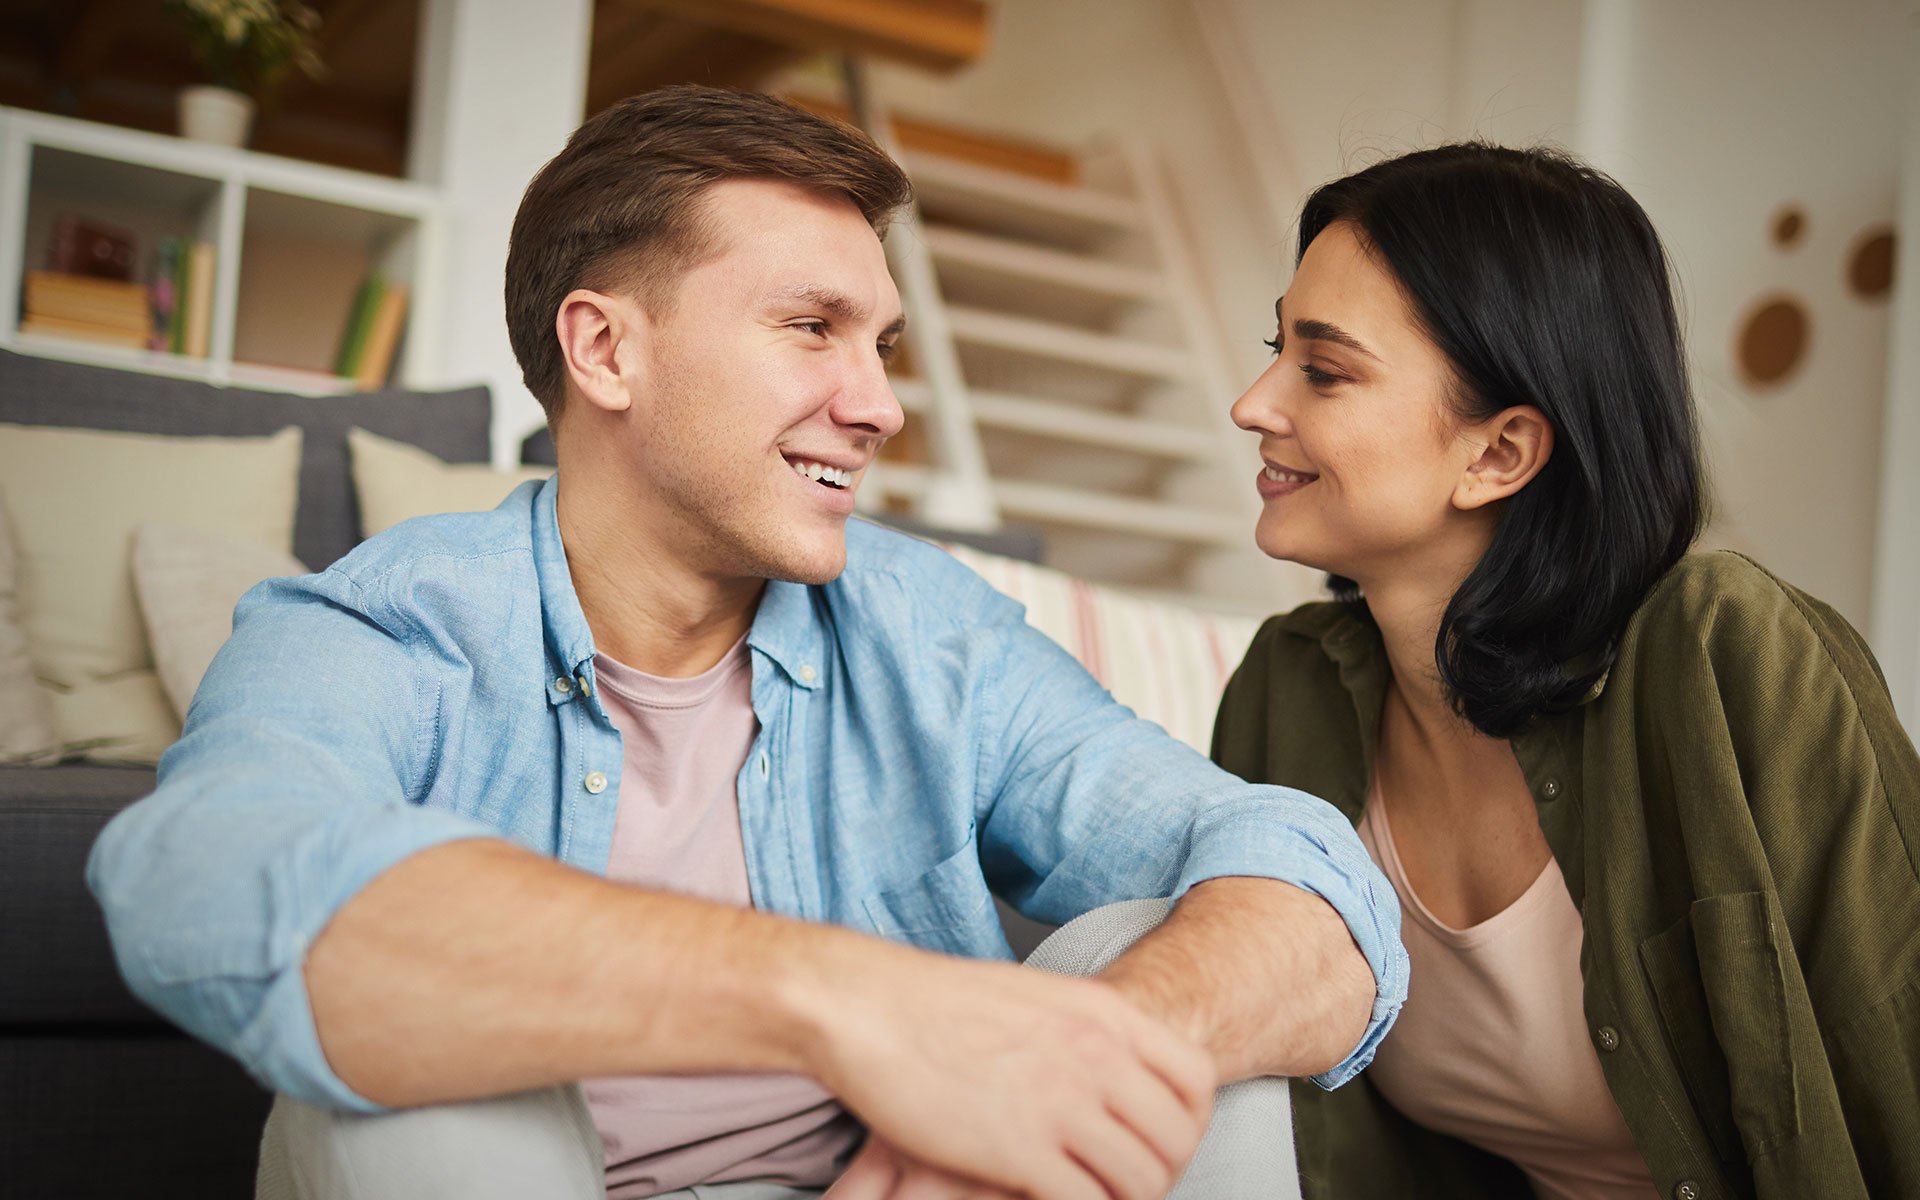 Improve Communication with Your Spouse